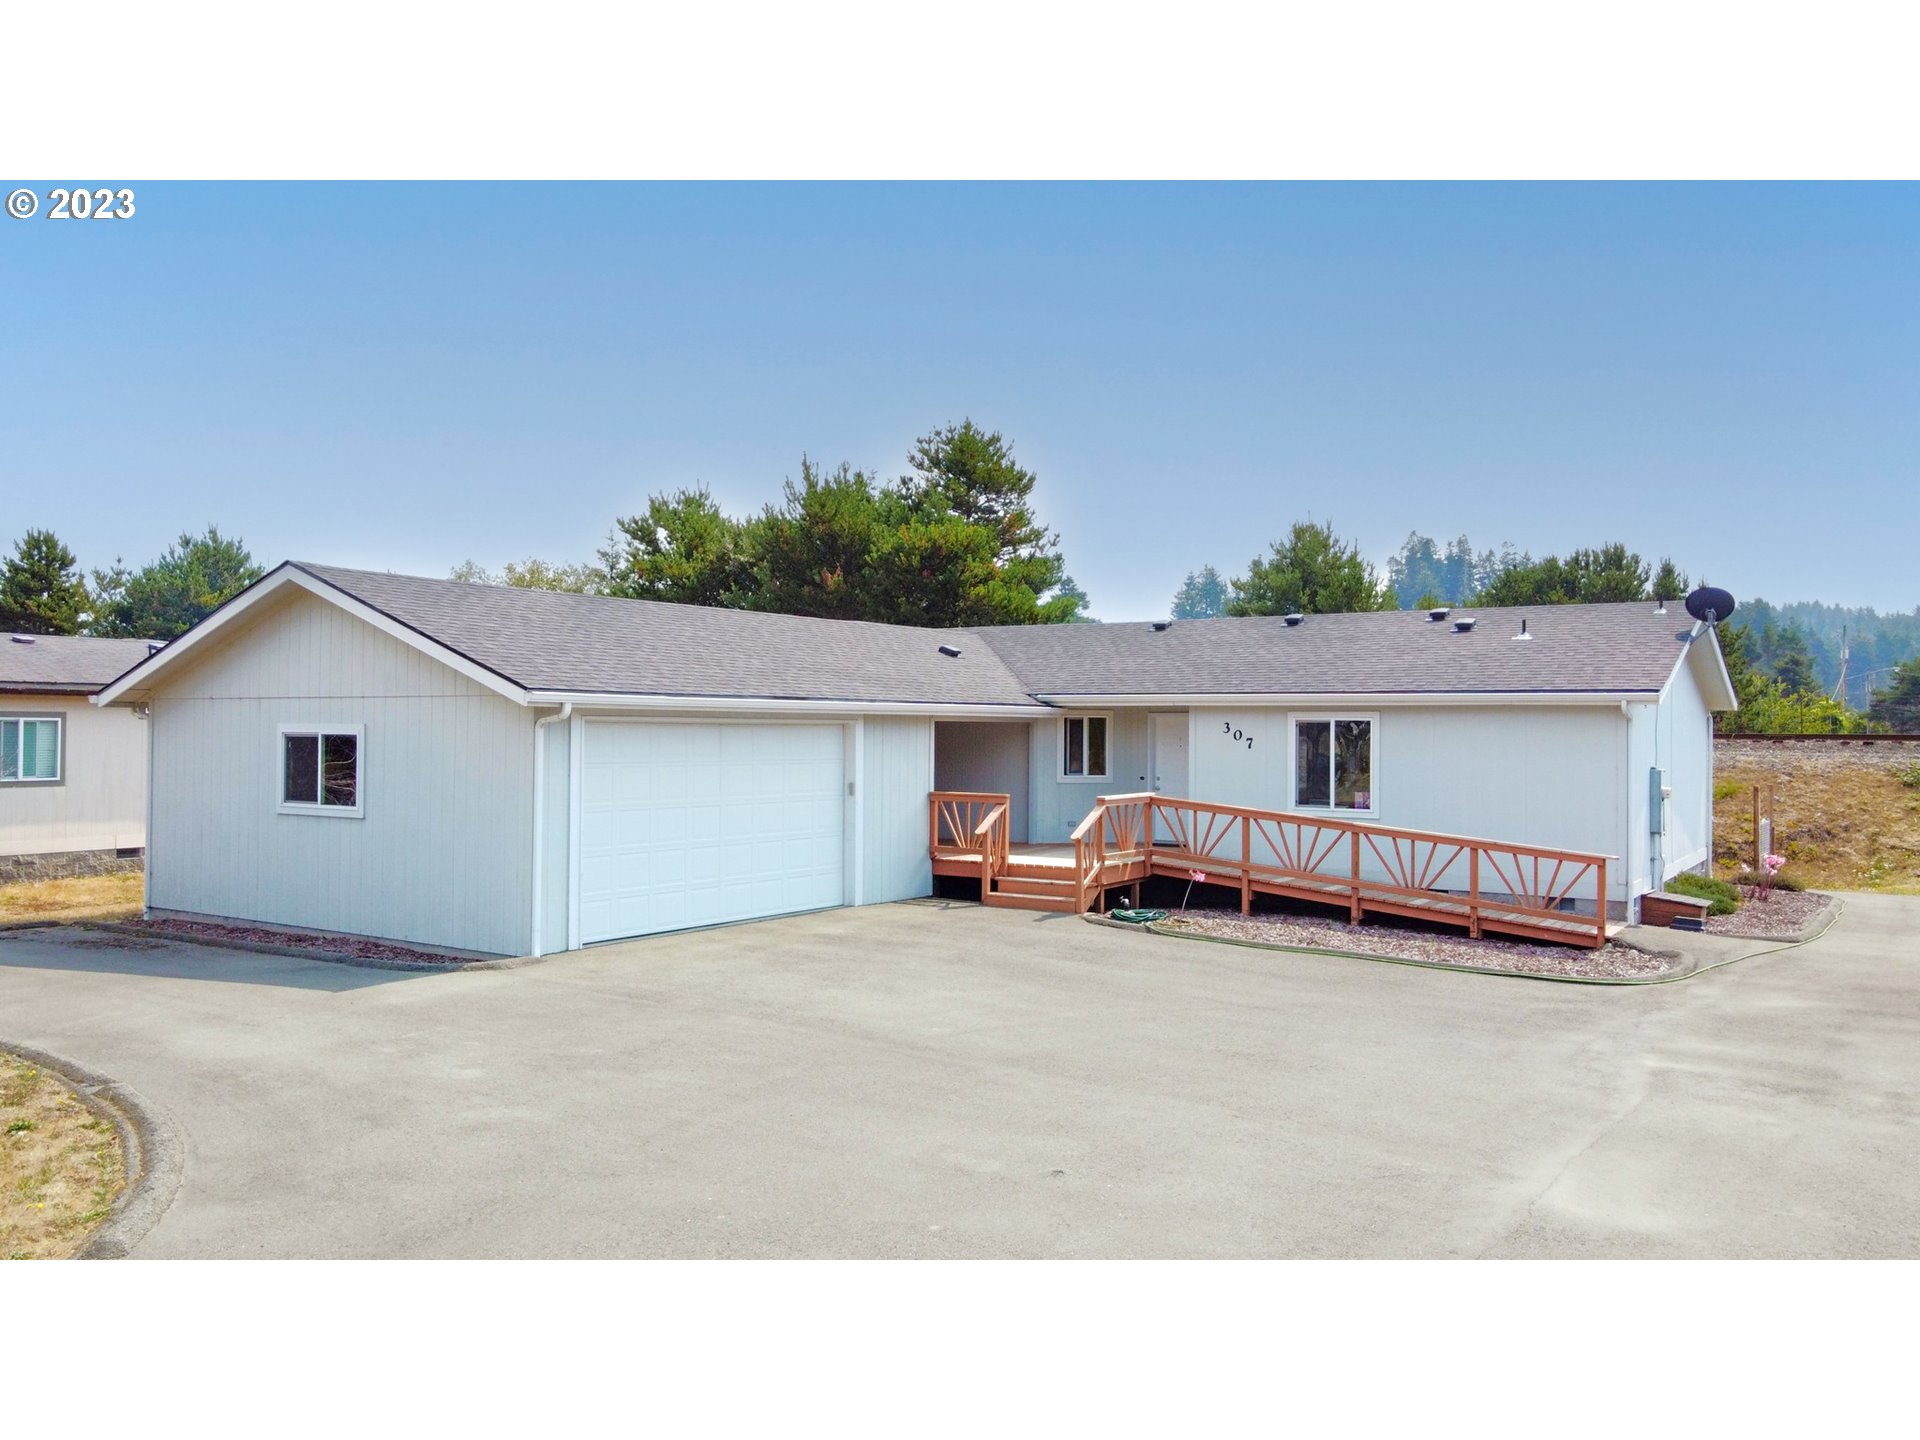 307 AIRPORT WAY, Lakeside, OR 97449